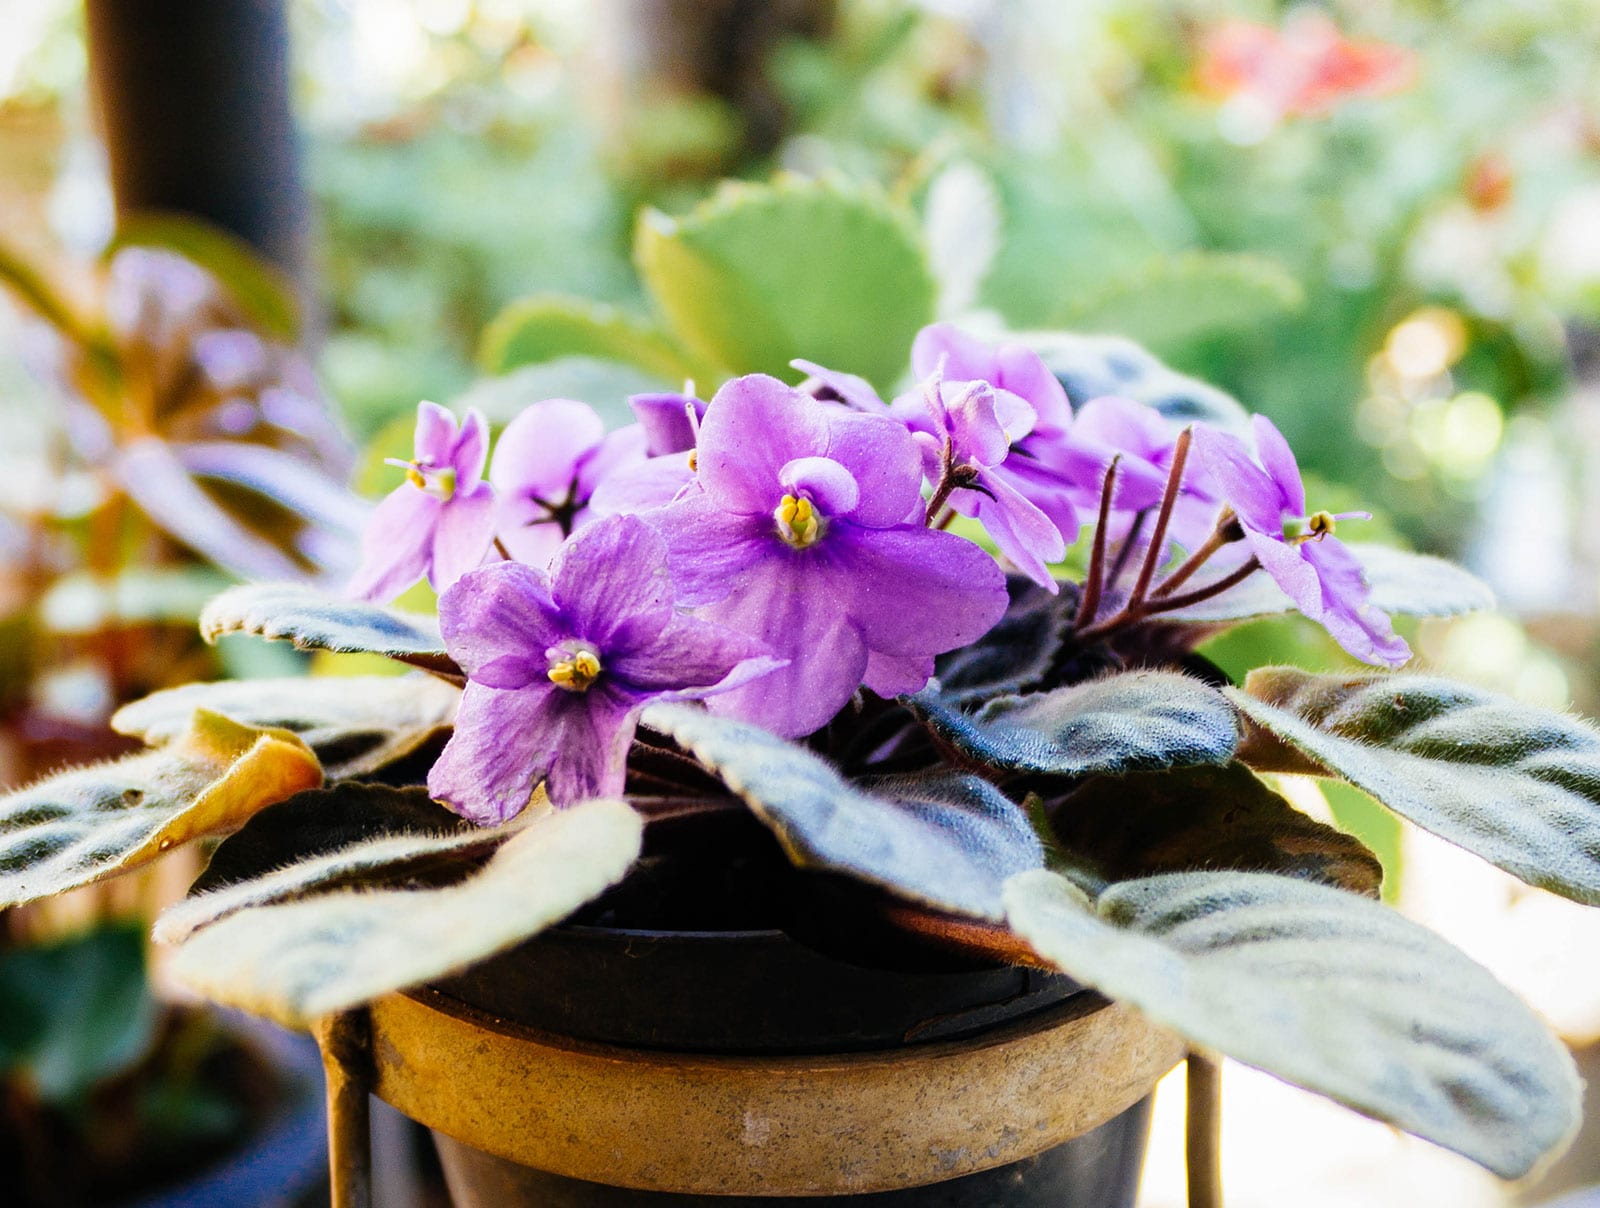 A purple African violet in a black and metal pot with other plants in the background